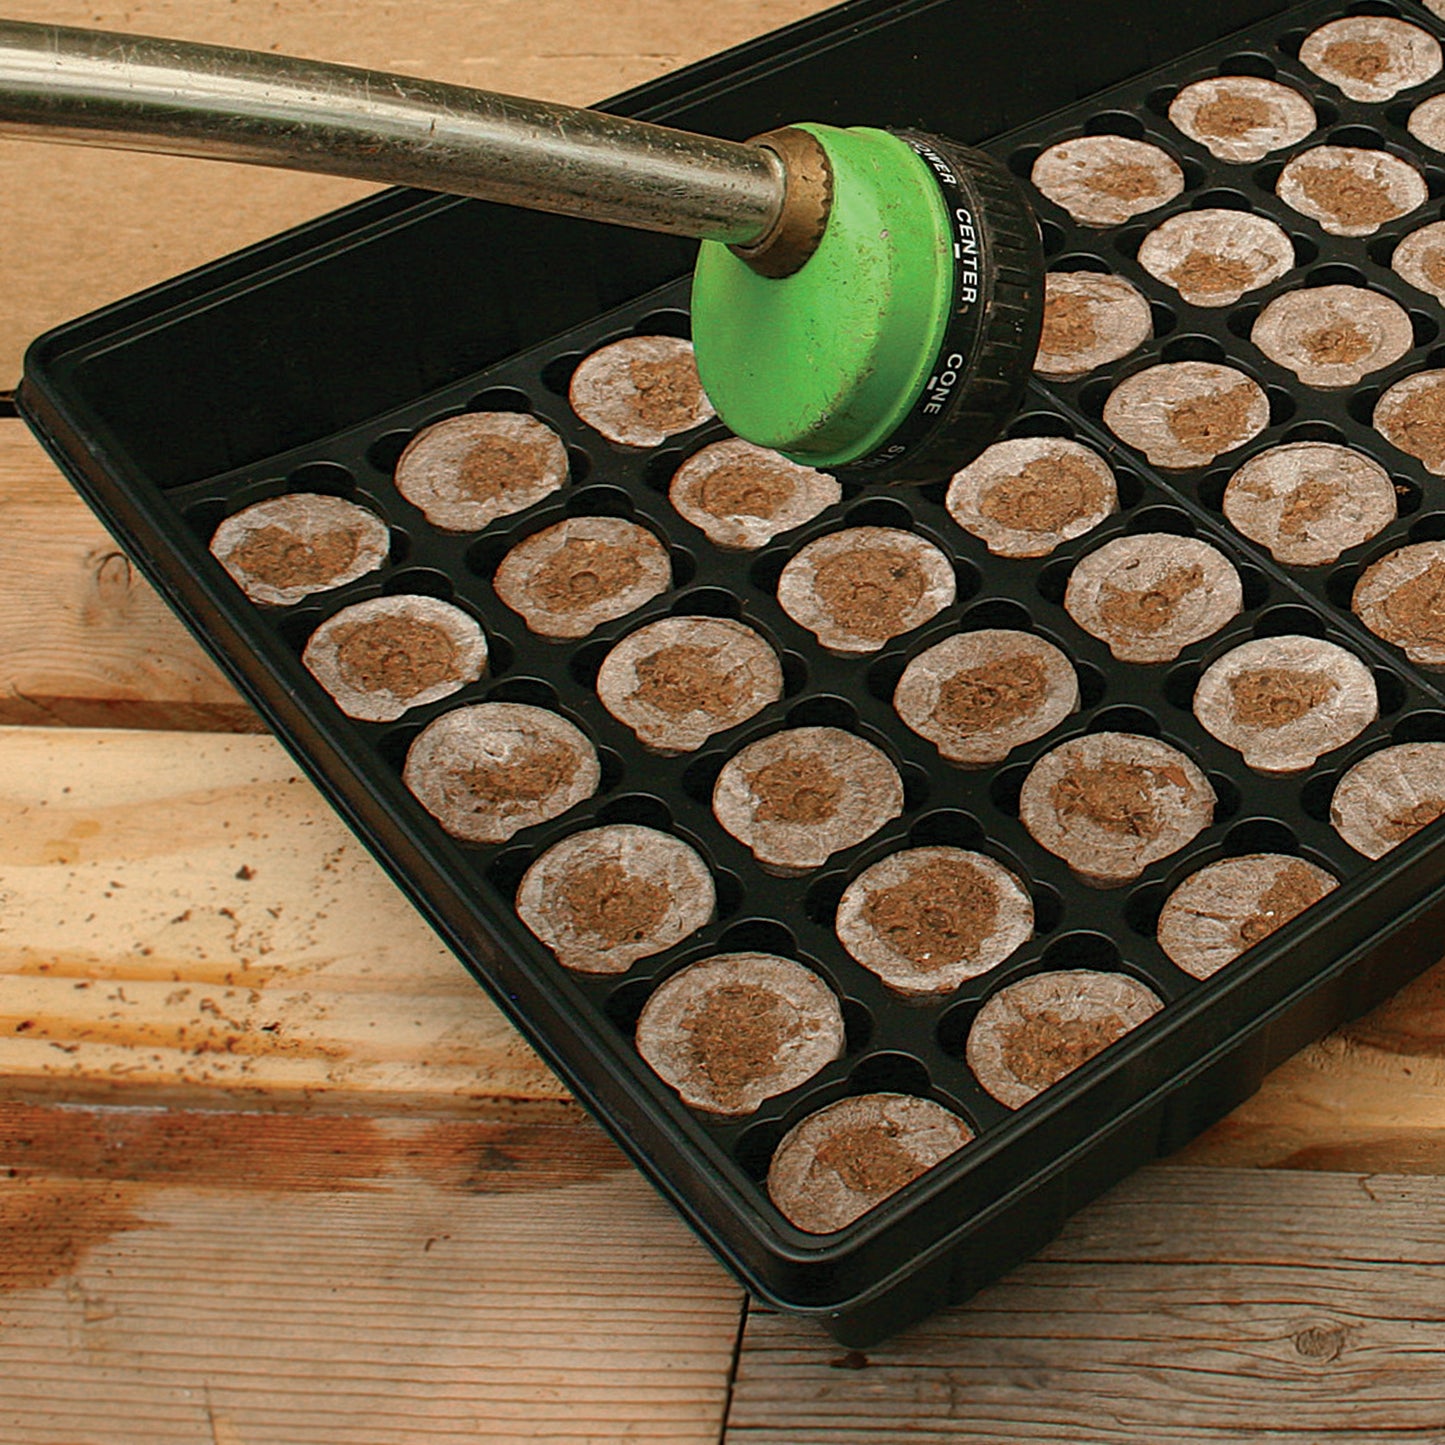 Add [warm] water to peat pellets in order to expand and begin sowing your seeds.